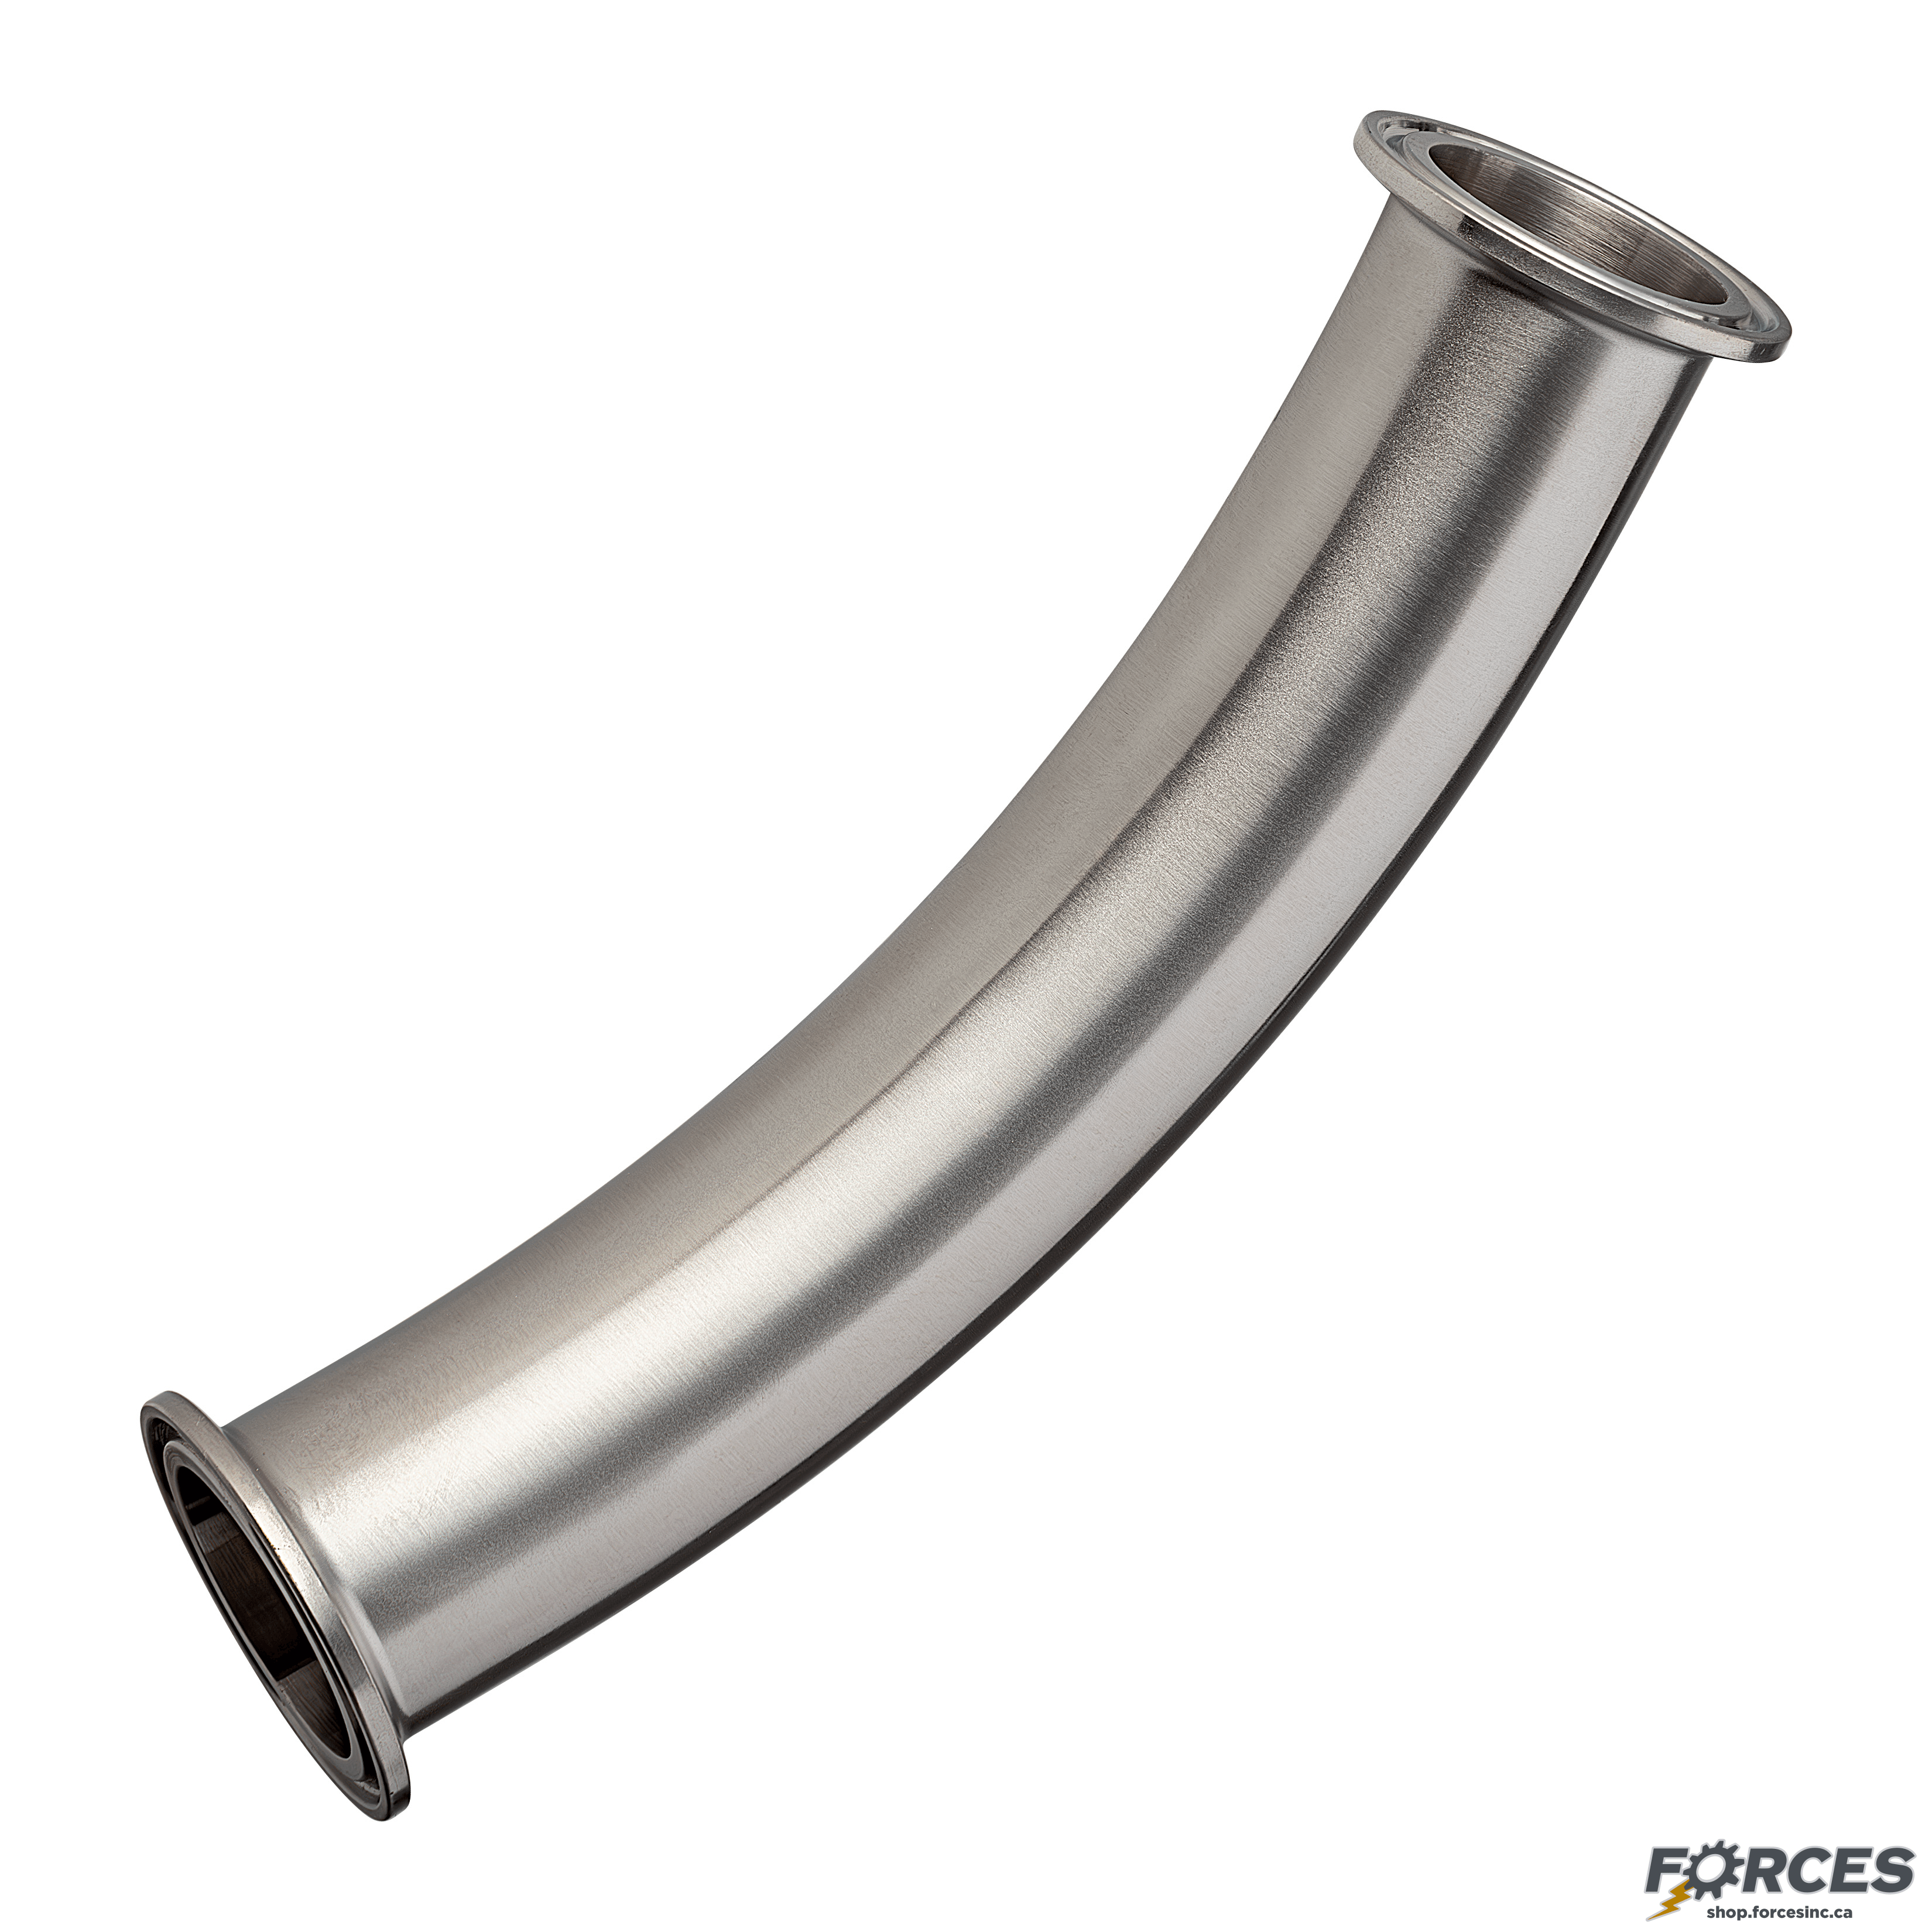 1-1/2" x 9" Tri-Clamp 45° Elbow Long Radius - Stainless Steel 304 - Forces Inc